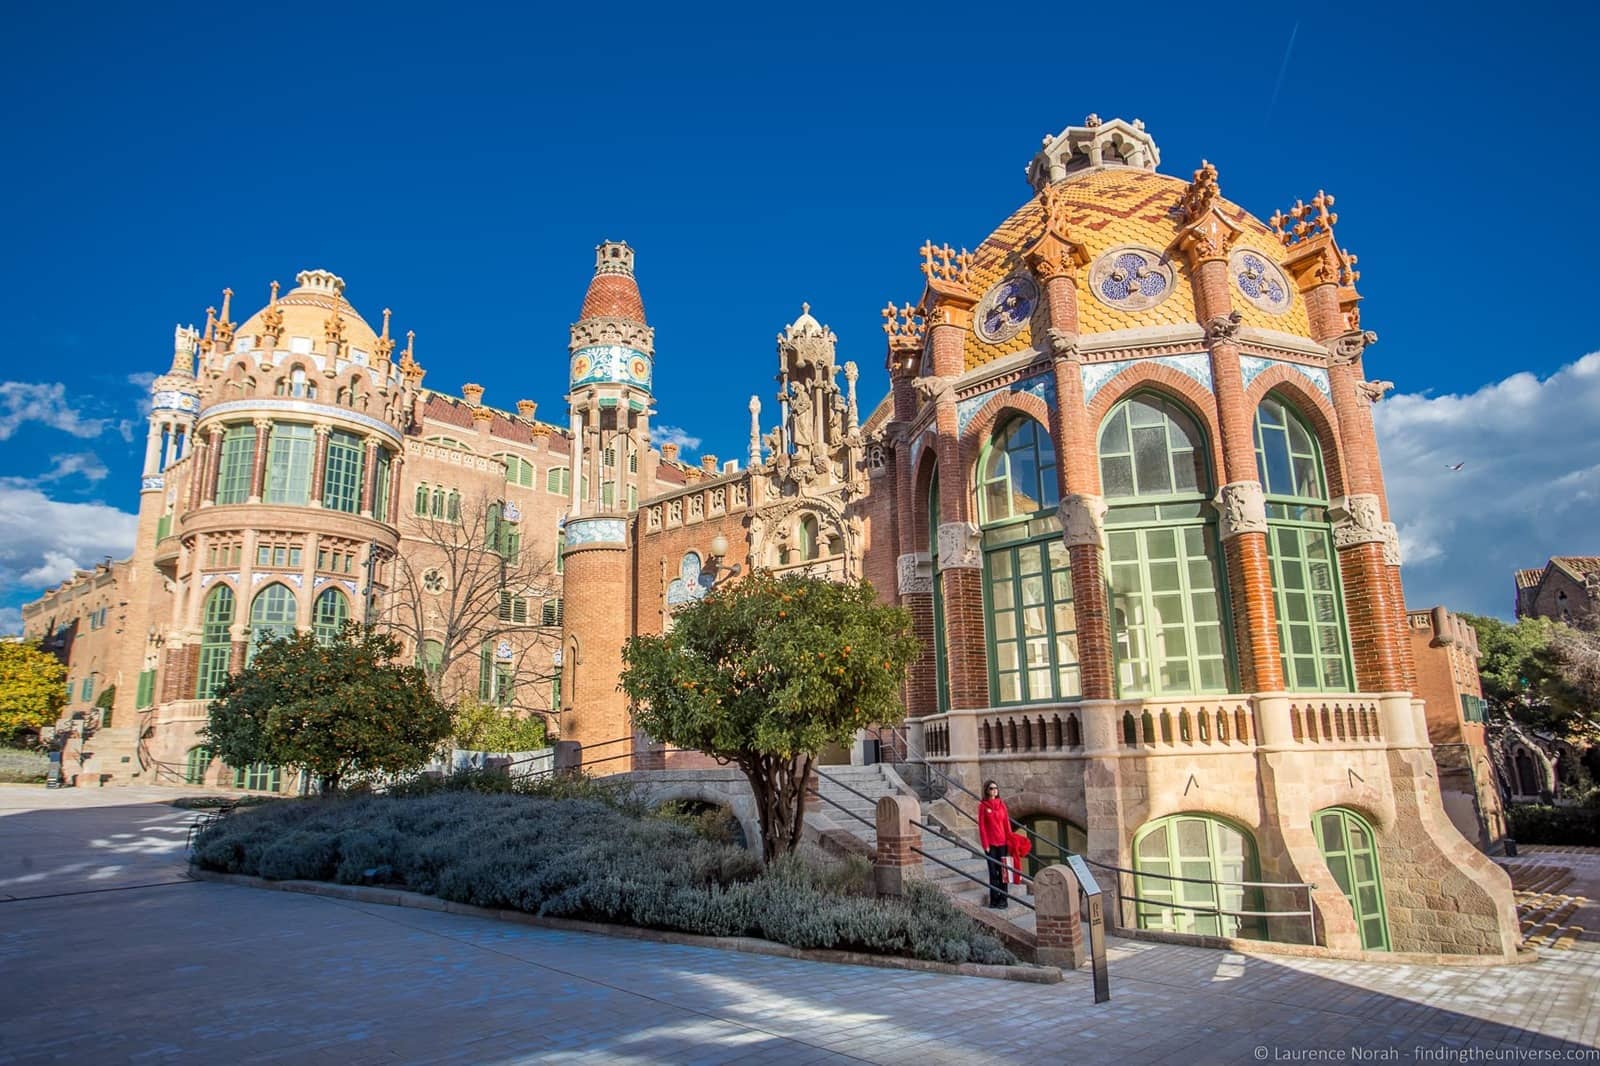 Barcelona is one of Europe s most popular cities for visitors and one of our favourite cities too There s loads to see and do from the incredible